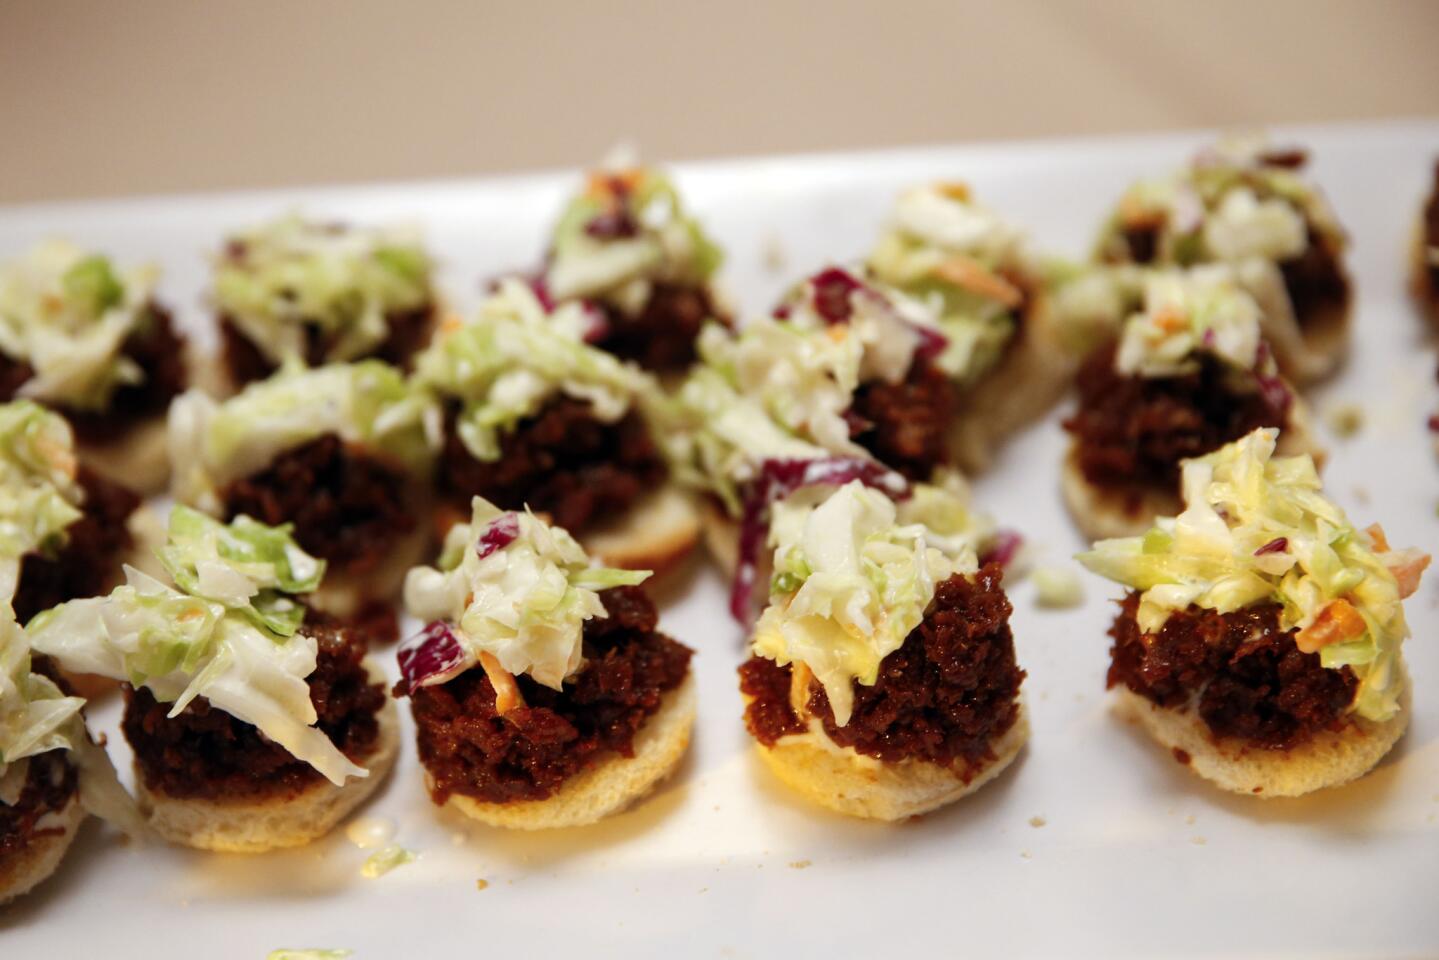 Vegan barbecue 'pork' canapes from Doomie's Home Cookin'